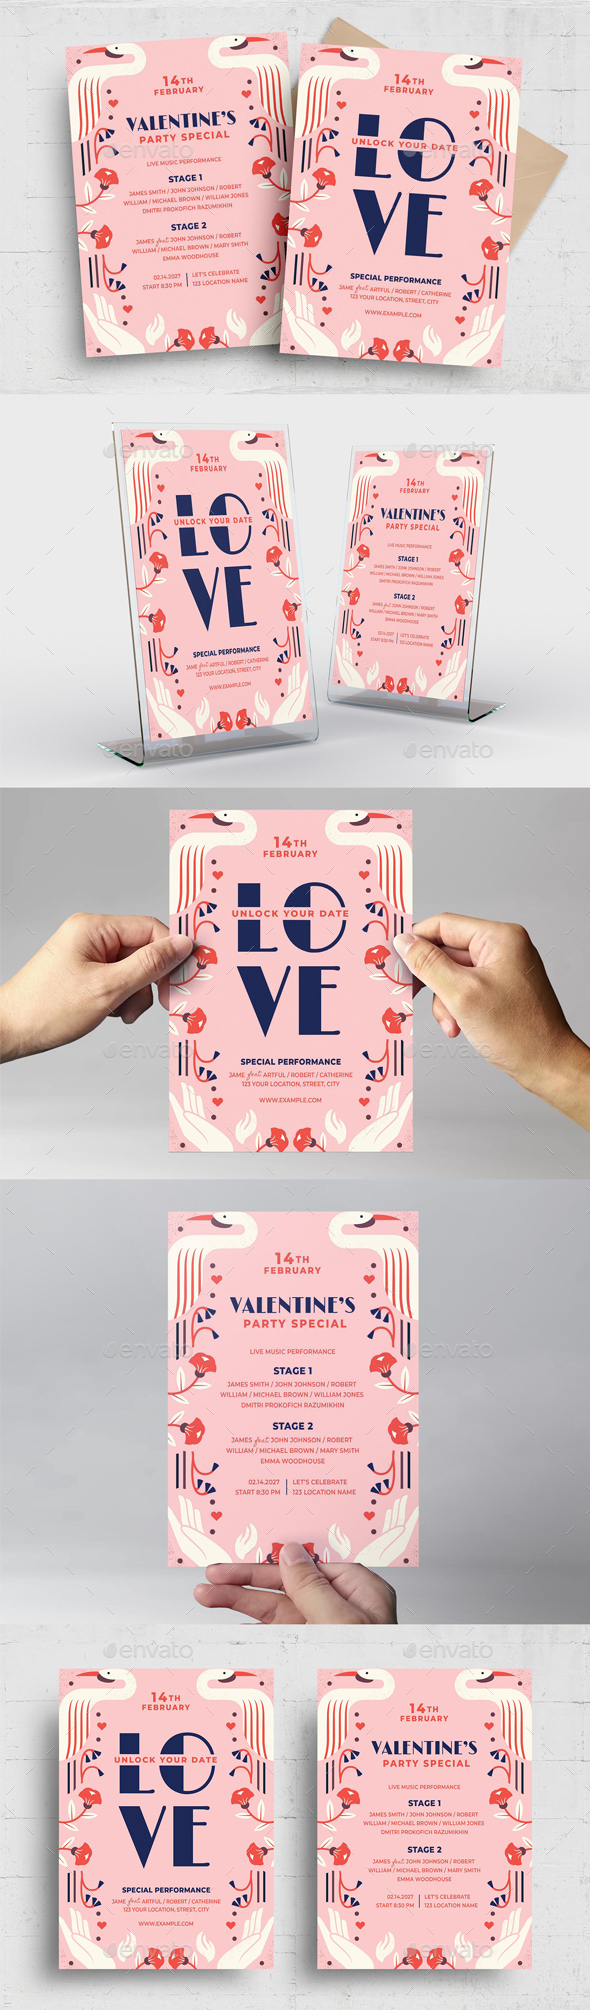 Valentines Flyers With Vintage Decor